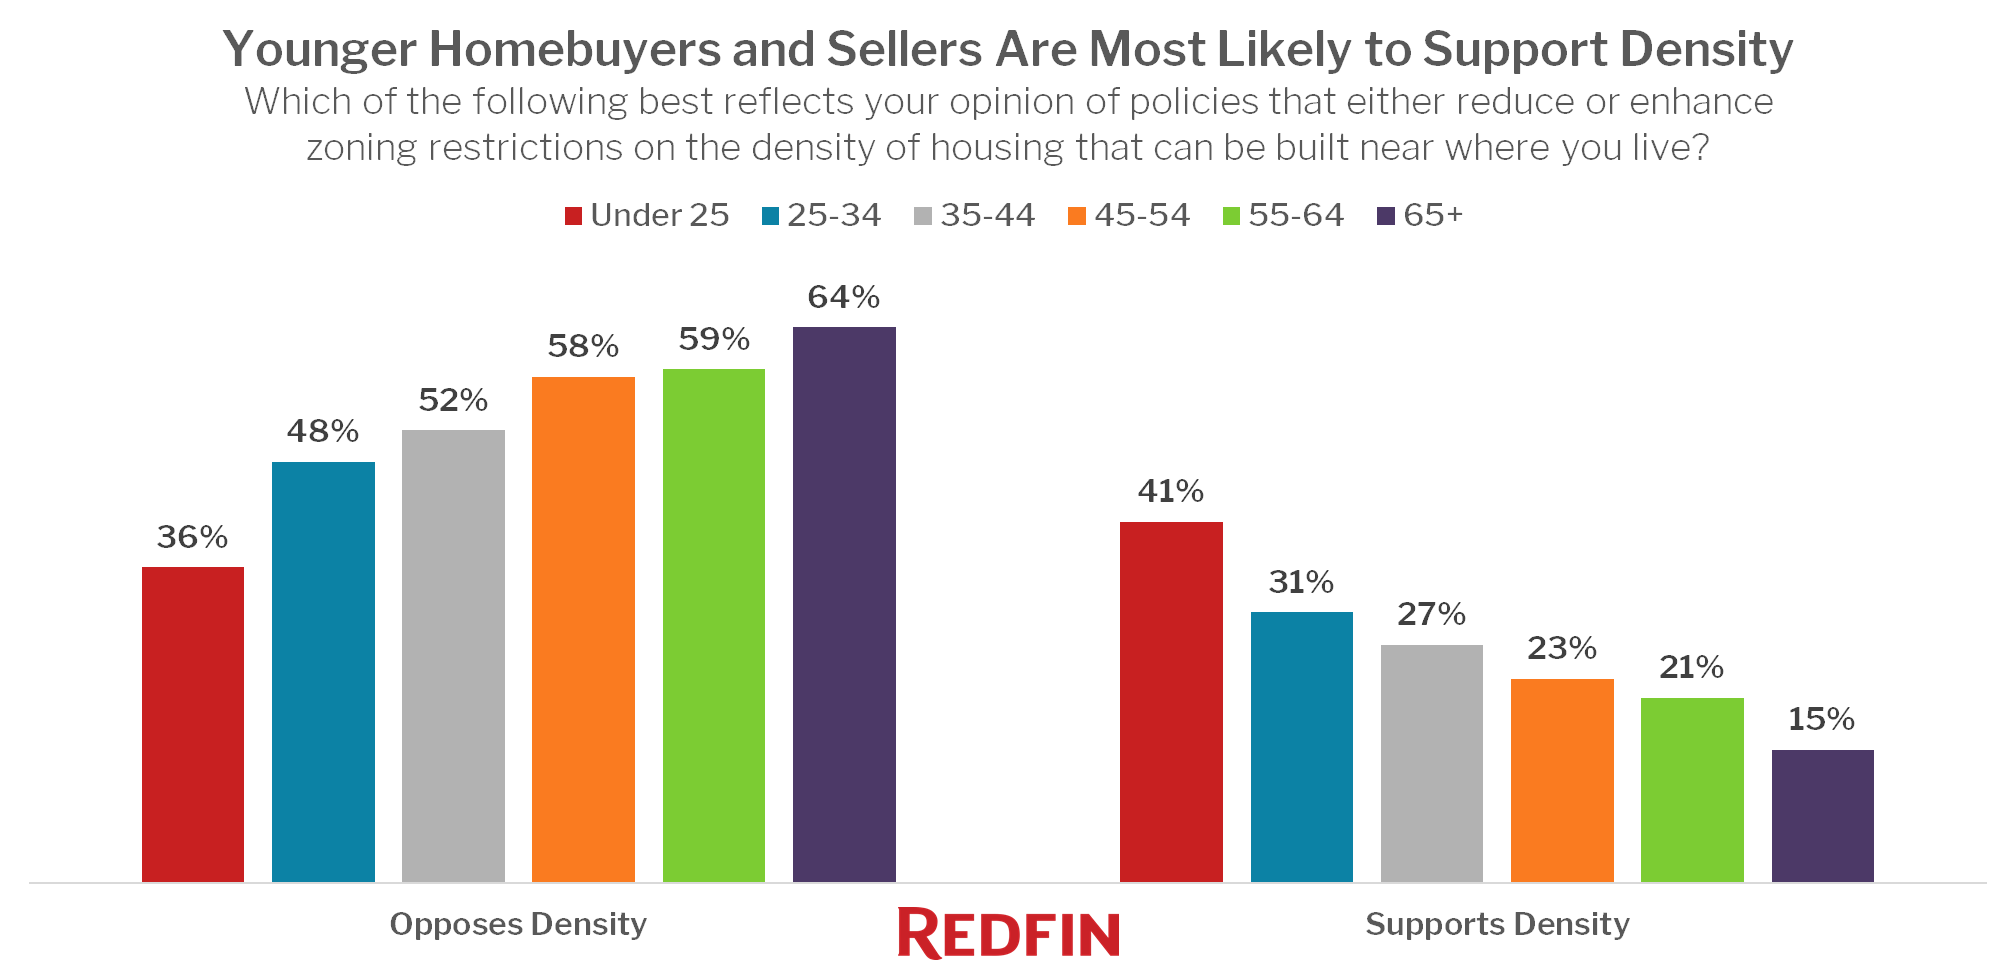 Younger Homebuyers and Sellers Are Most Likely to Support Density